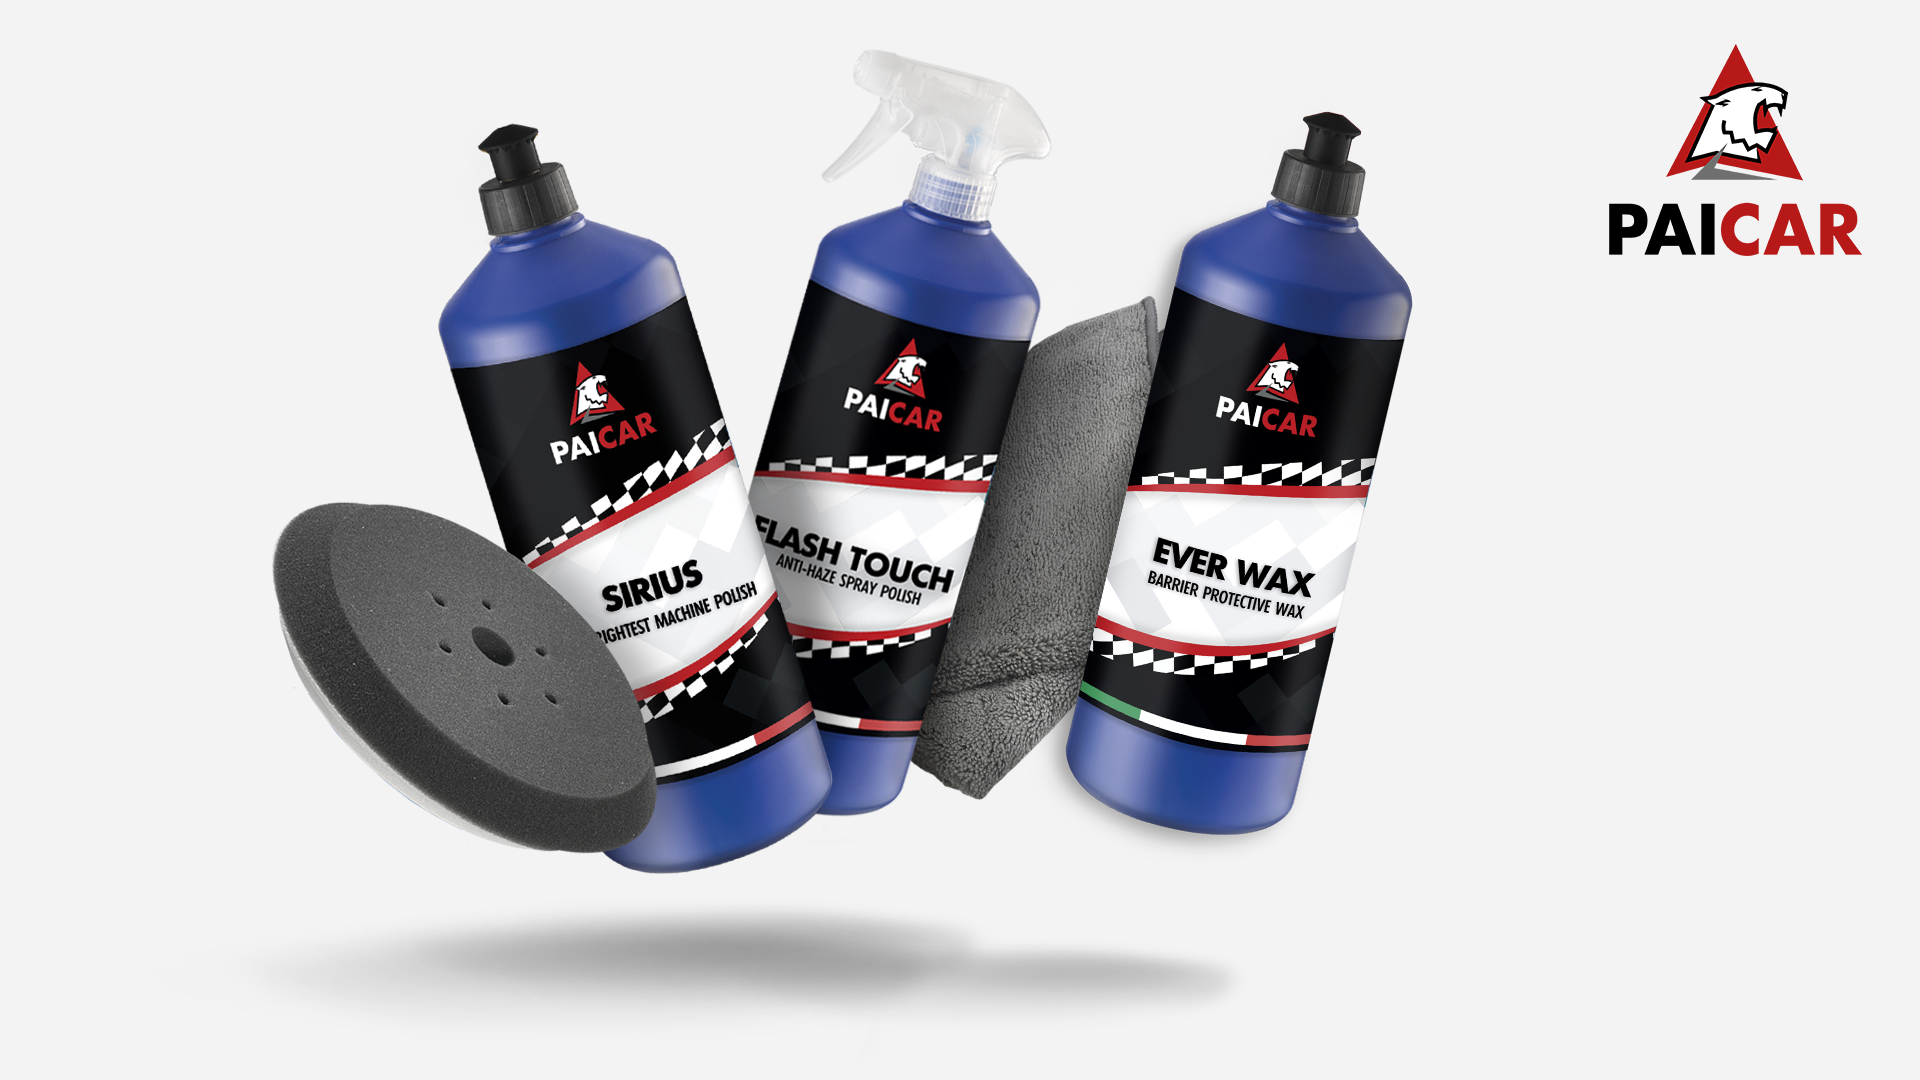 PAI CAR polishing compound and care products - Pai Cristal